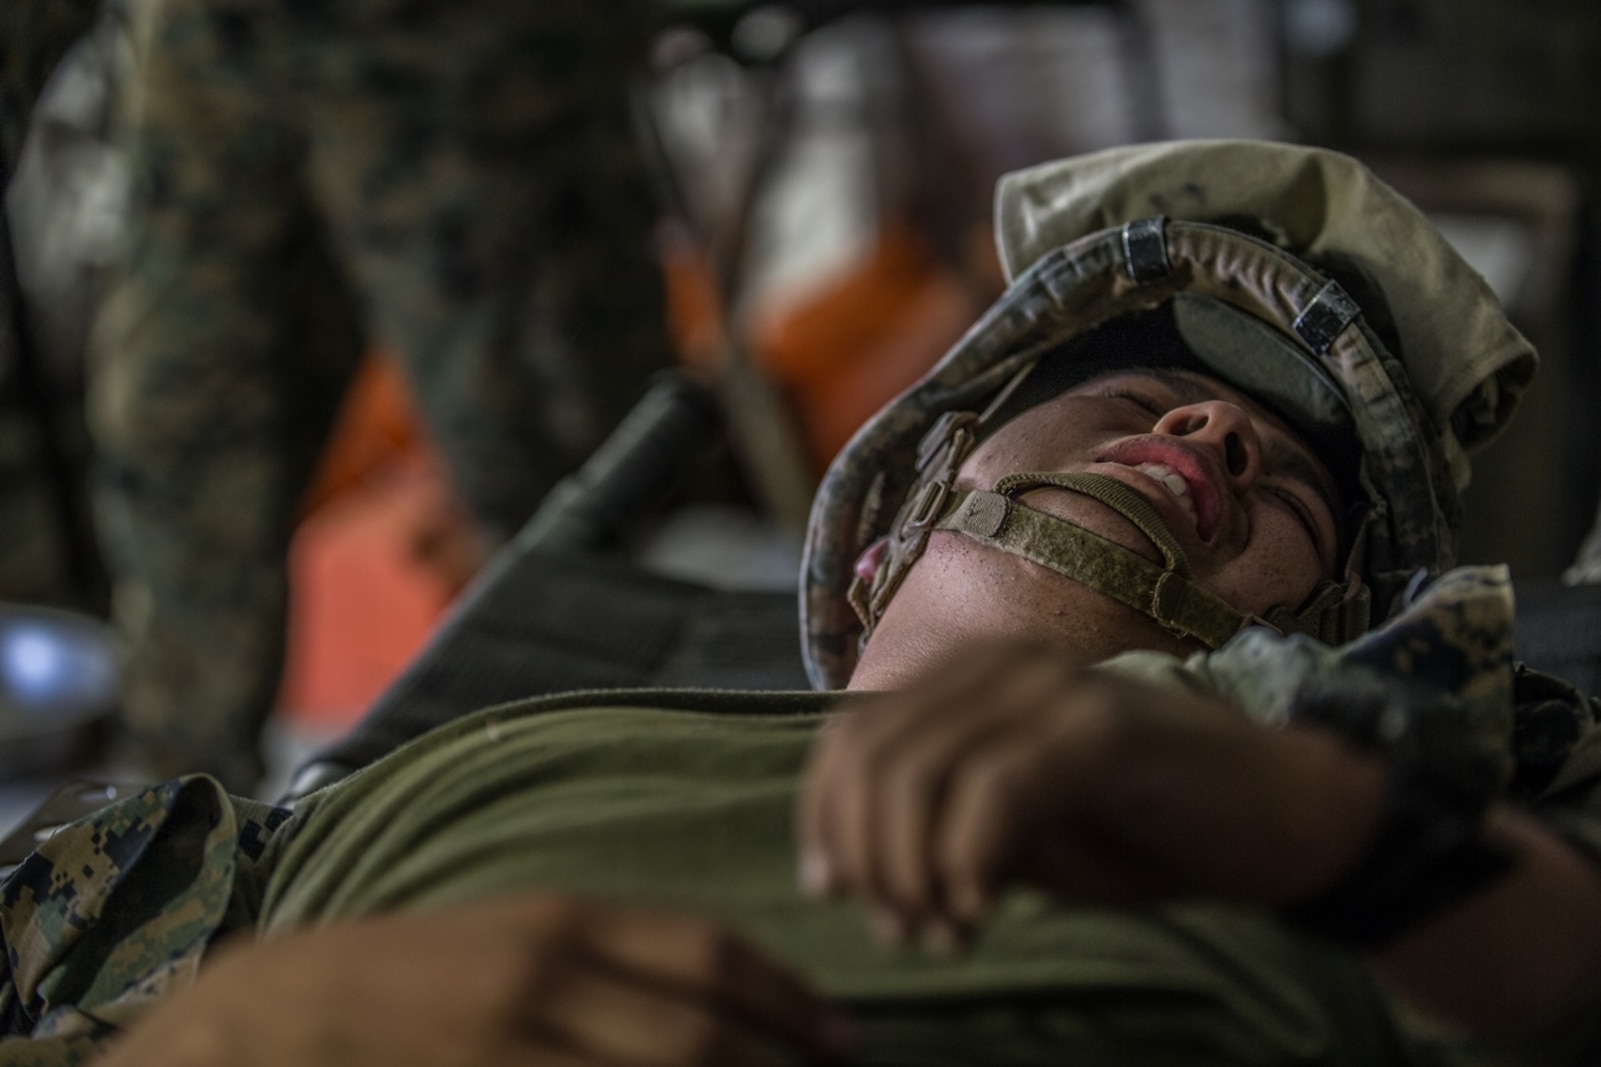 BRIDGEPORT, Calif. - U.S. Marine Pfc. Nelson Ramirez, a motor vehicle operator with Combat Logistics Battalion 5, Combat Logistics Regiment 1, 1st Marine Logistics Group, assumes the role of a casualty during a simulated casualty drill as part of Mountain Training Exercise 4-17 at Mountain Warfare Training Center, Aug. 2, 2017. The Mountain Warfare Training Center is 6800 feet above sea level and exists to train units in complex compartmented terrain. Simulated casualty drills provide Marines with the opportunity to operate in its unique terrain and overcome various environmental obstacles. (U.S. Marine Corps photo by Lance Cpl. Timothy Shoemaker)